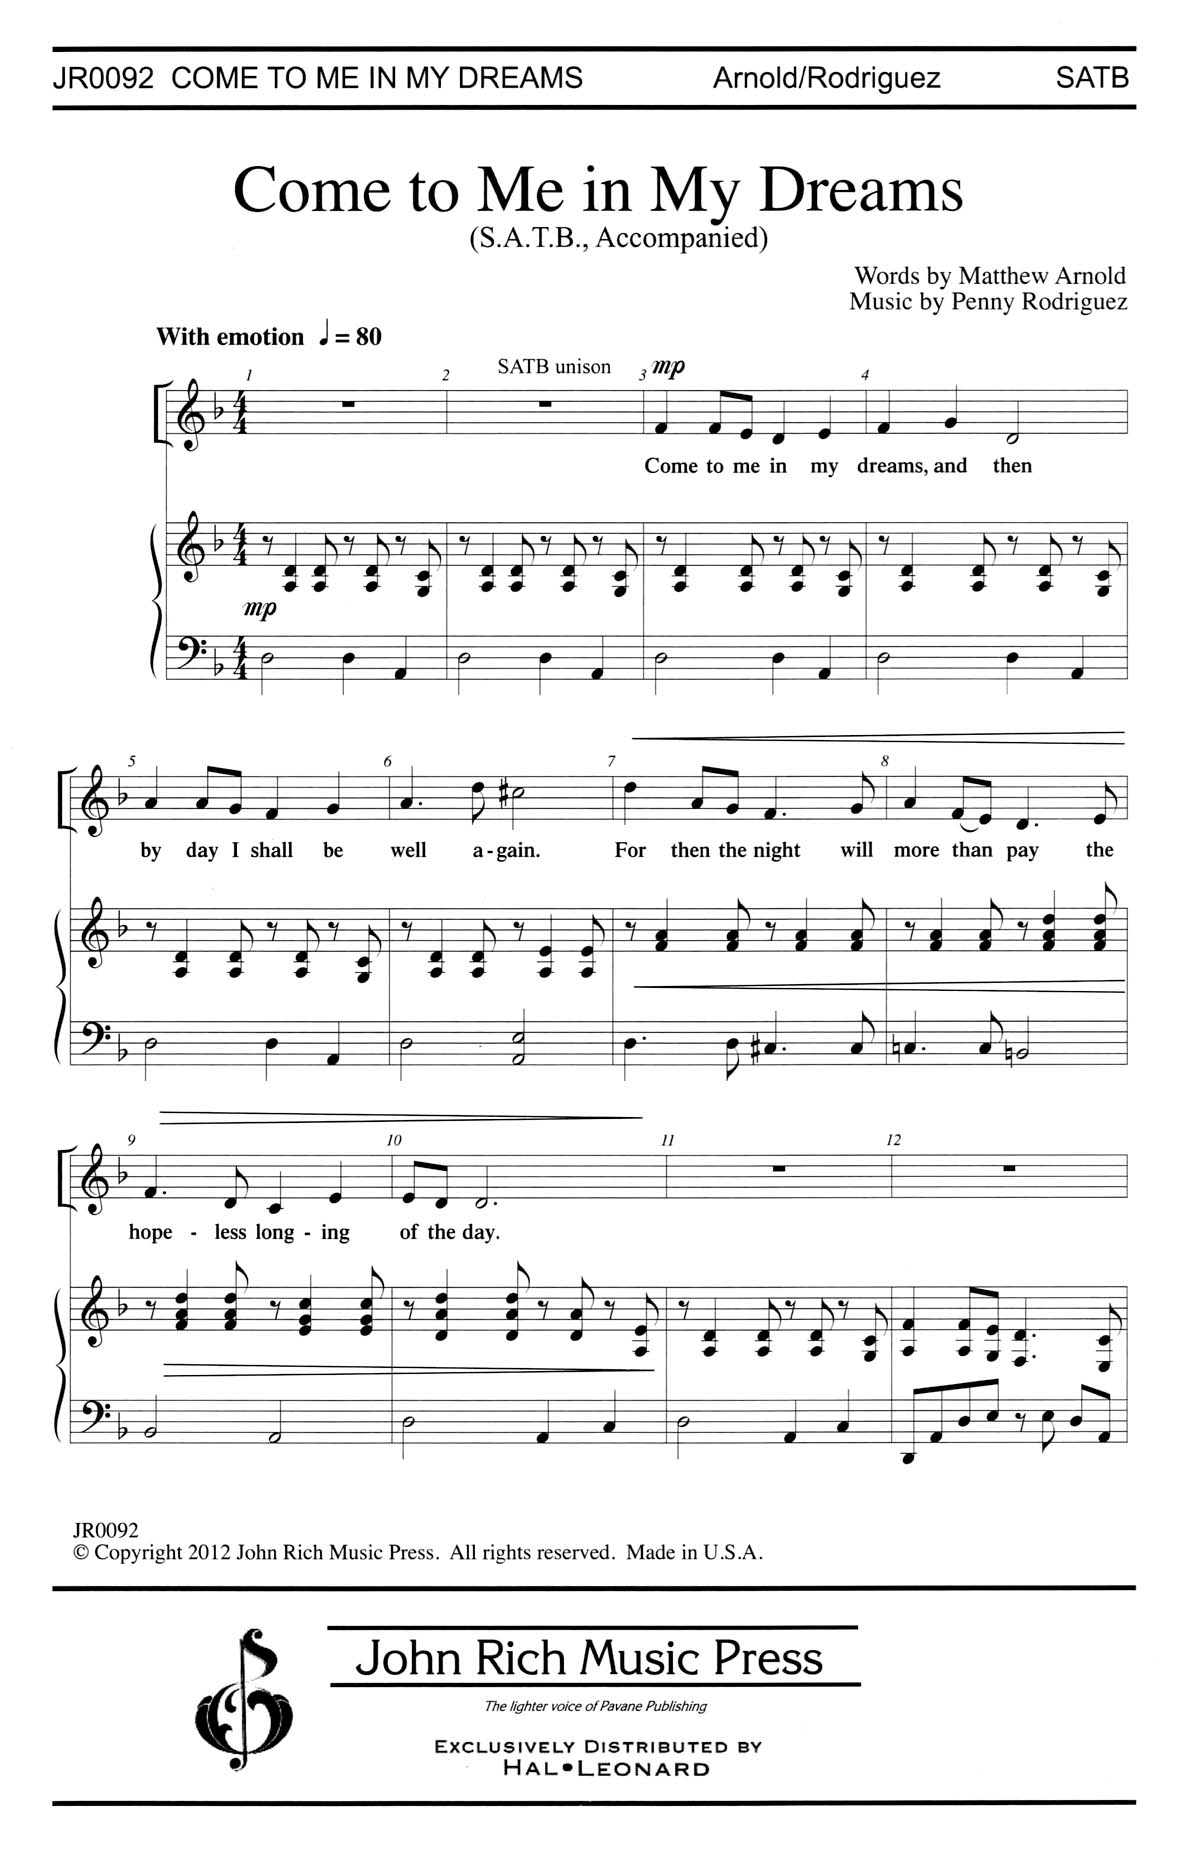 Penny Rodriguez: Come to Me in My Dreams: SATB: Vocal Score